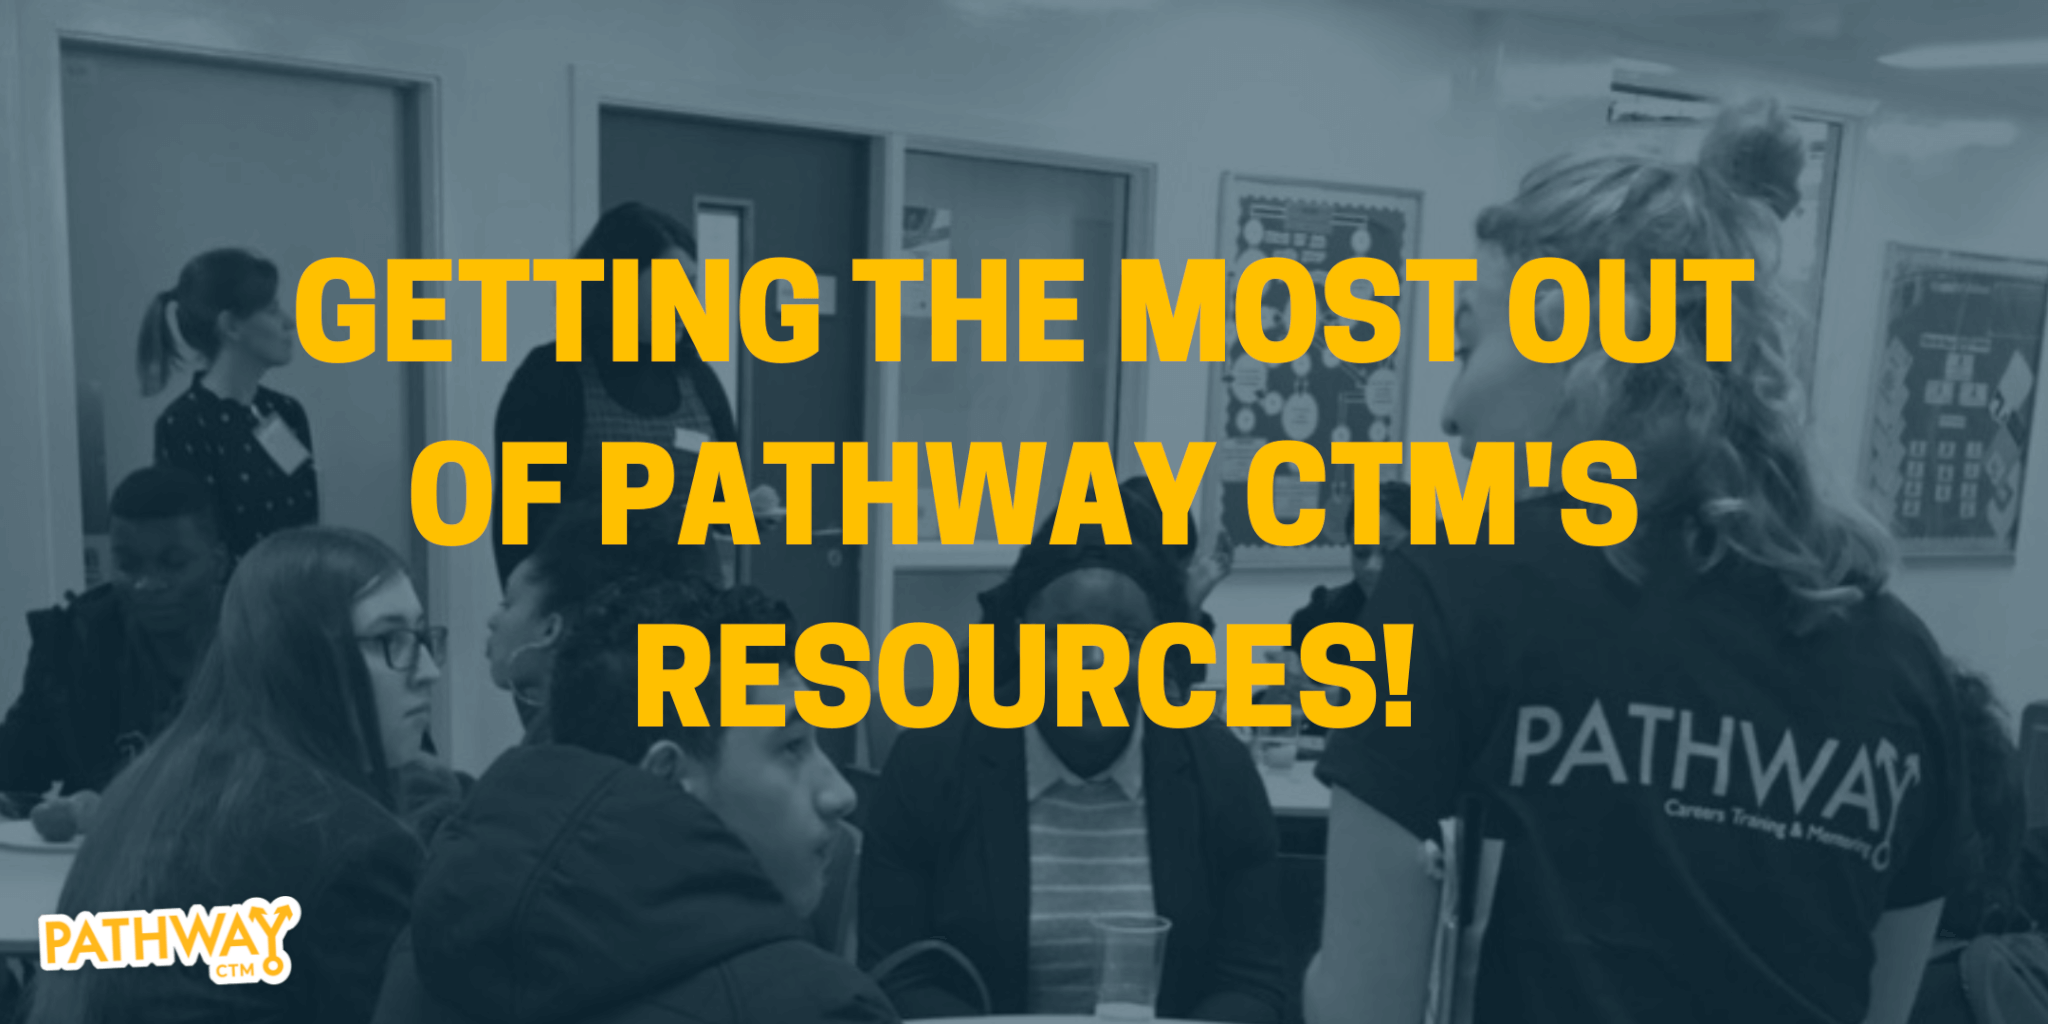 Getting the most out of Pathway CTM’s resources!